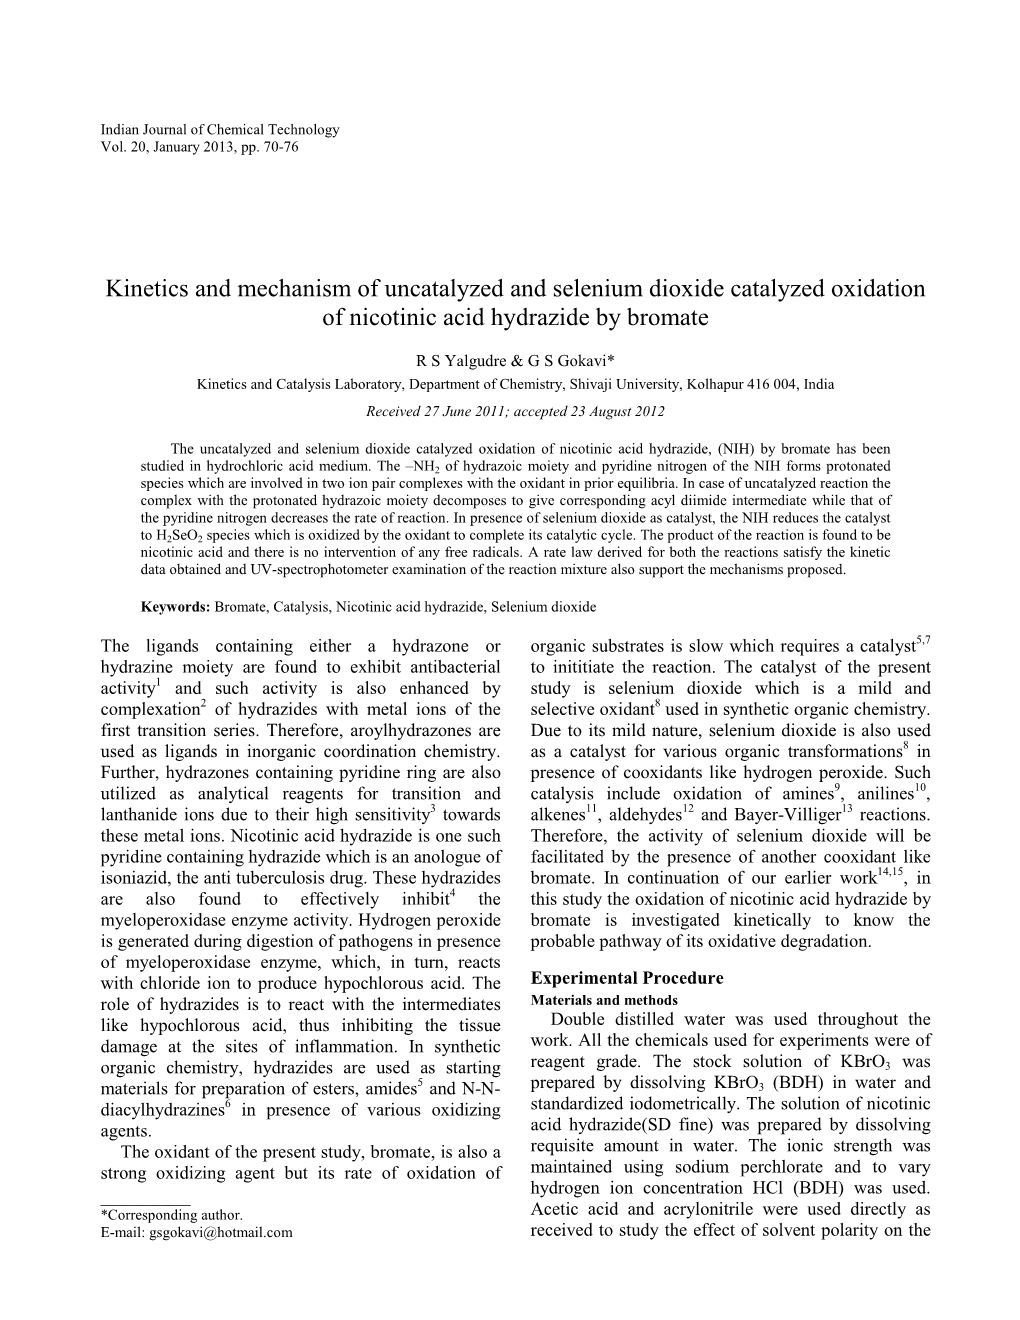 Kinetics and Mechanism of Uncatalyzed and Selenium Dioxide Catalyzed Oxidation of Nicotinic Acid Hydrazide by Bromate